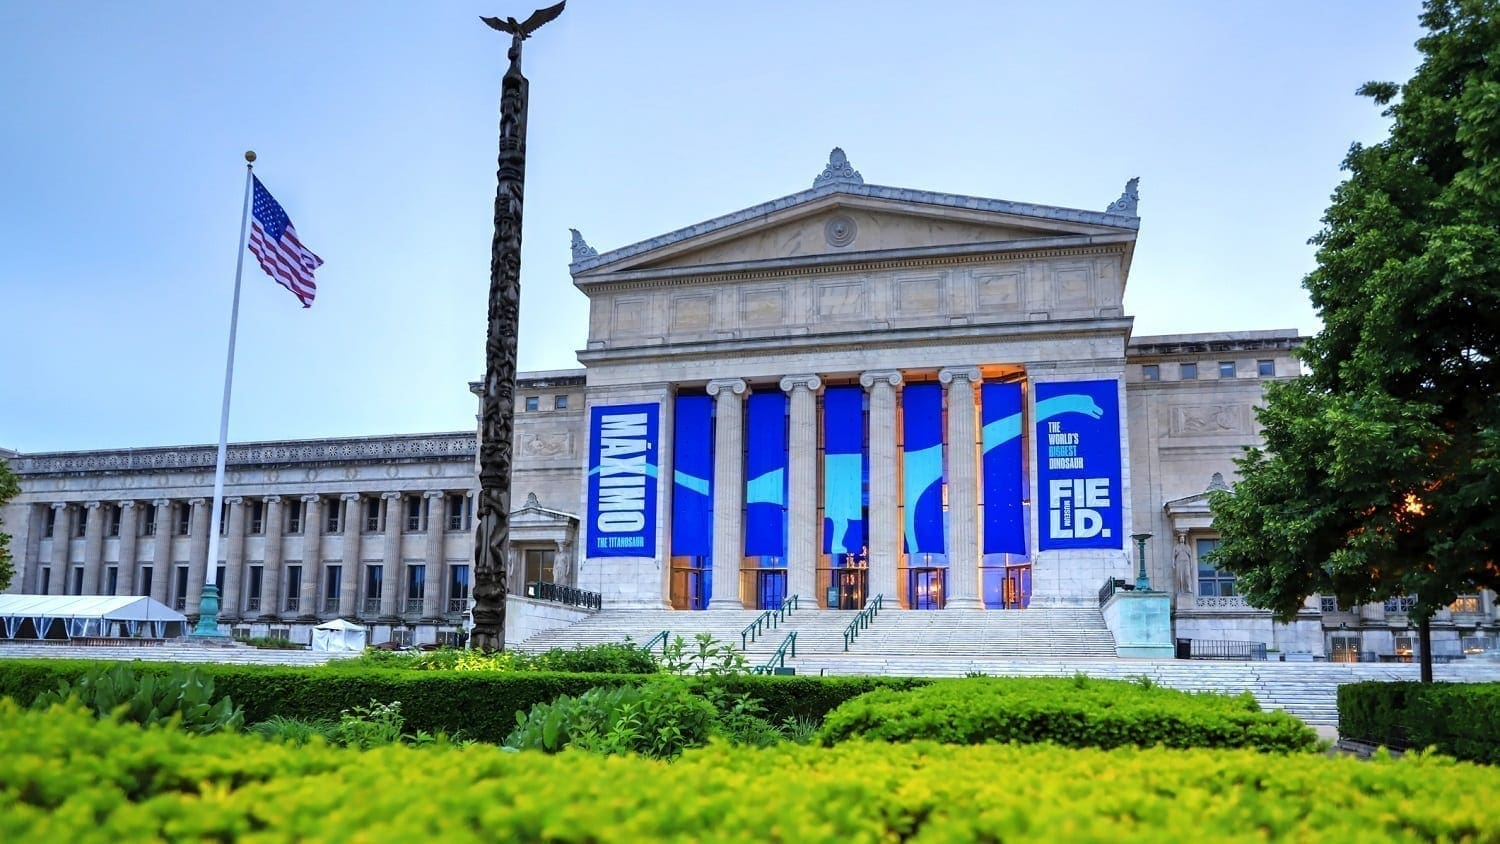 Front entrance at the Field Museum of Chicago: ID 120317244 © James Byard | Dreamstime.com